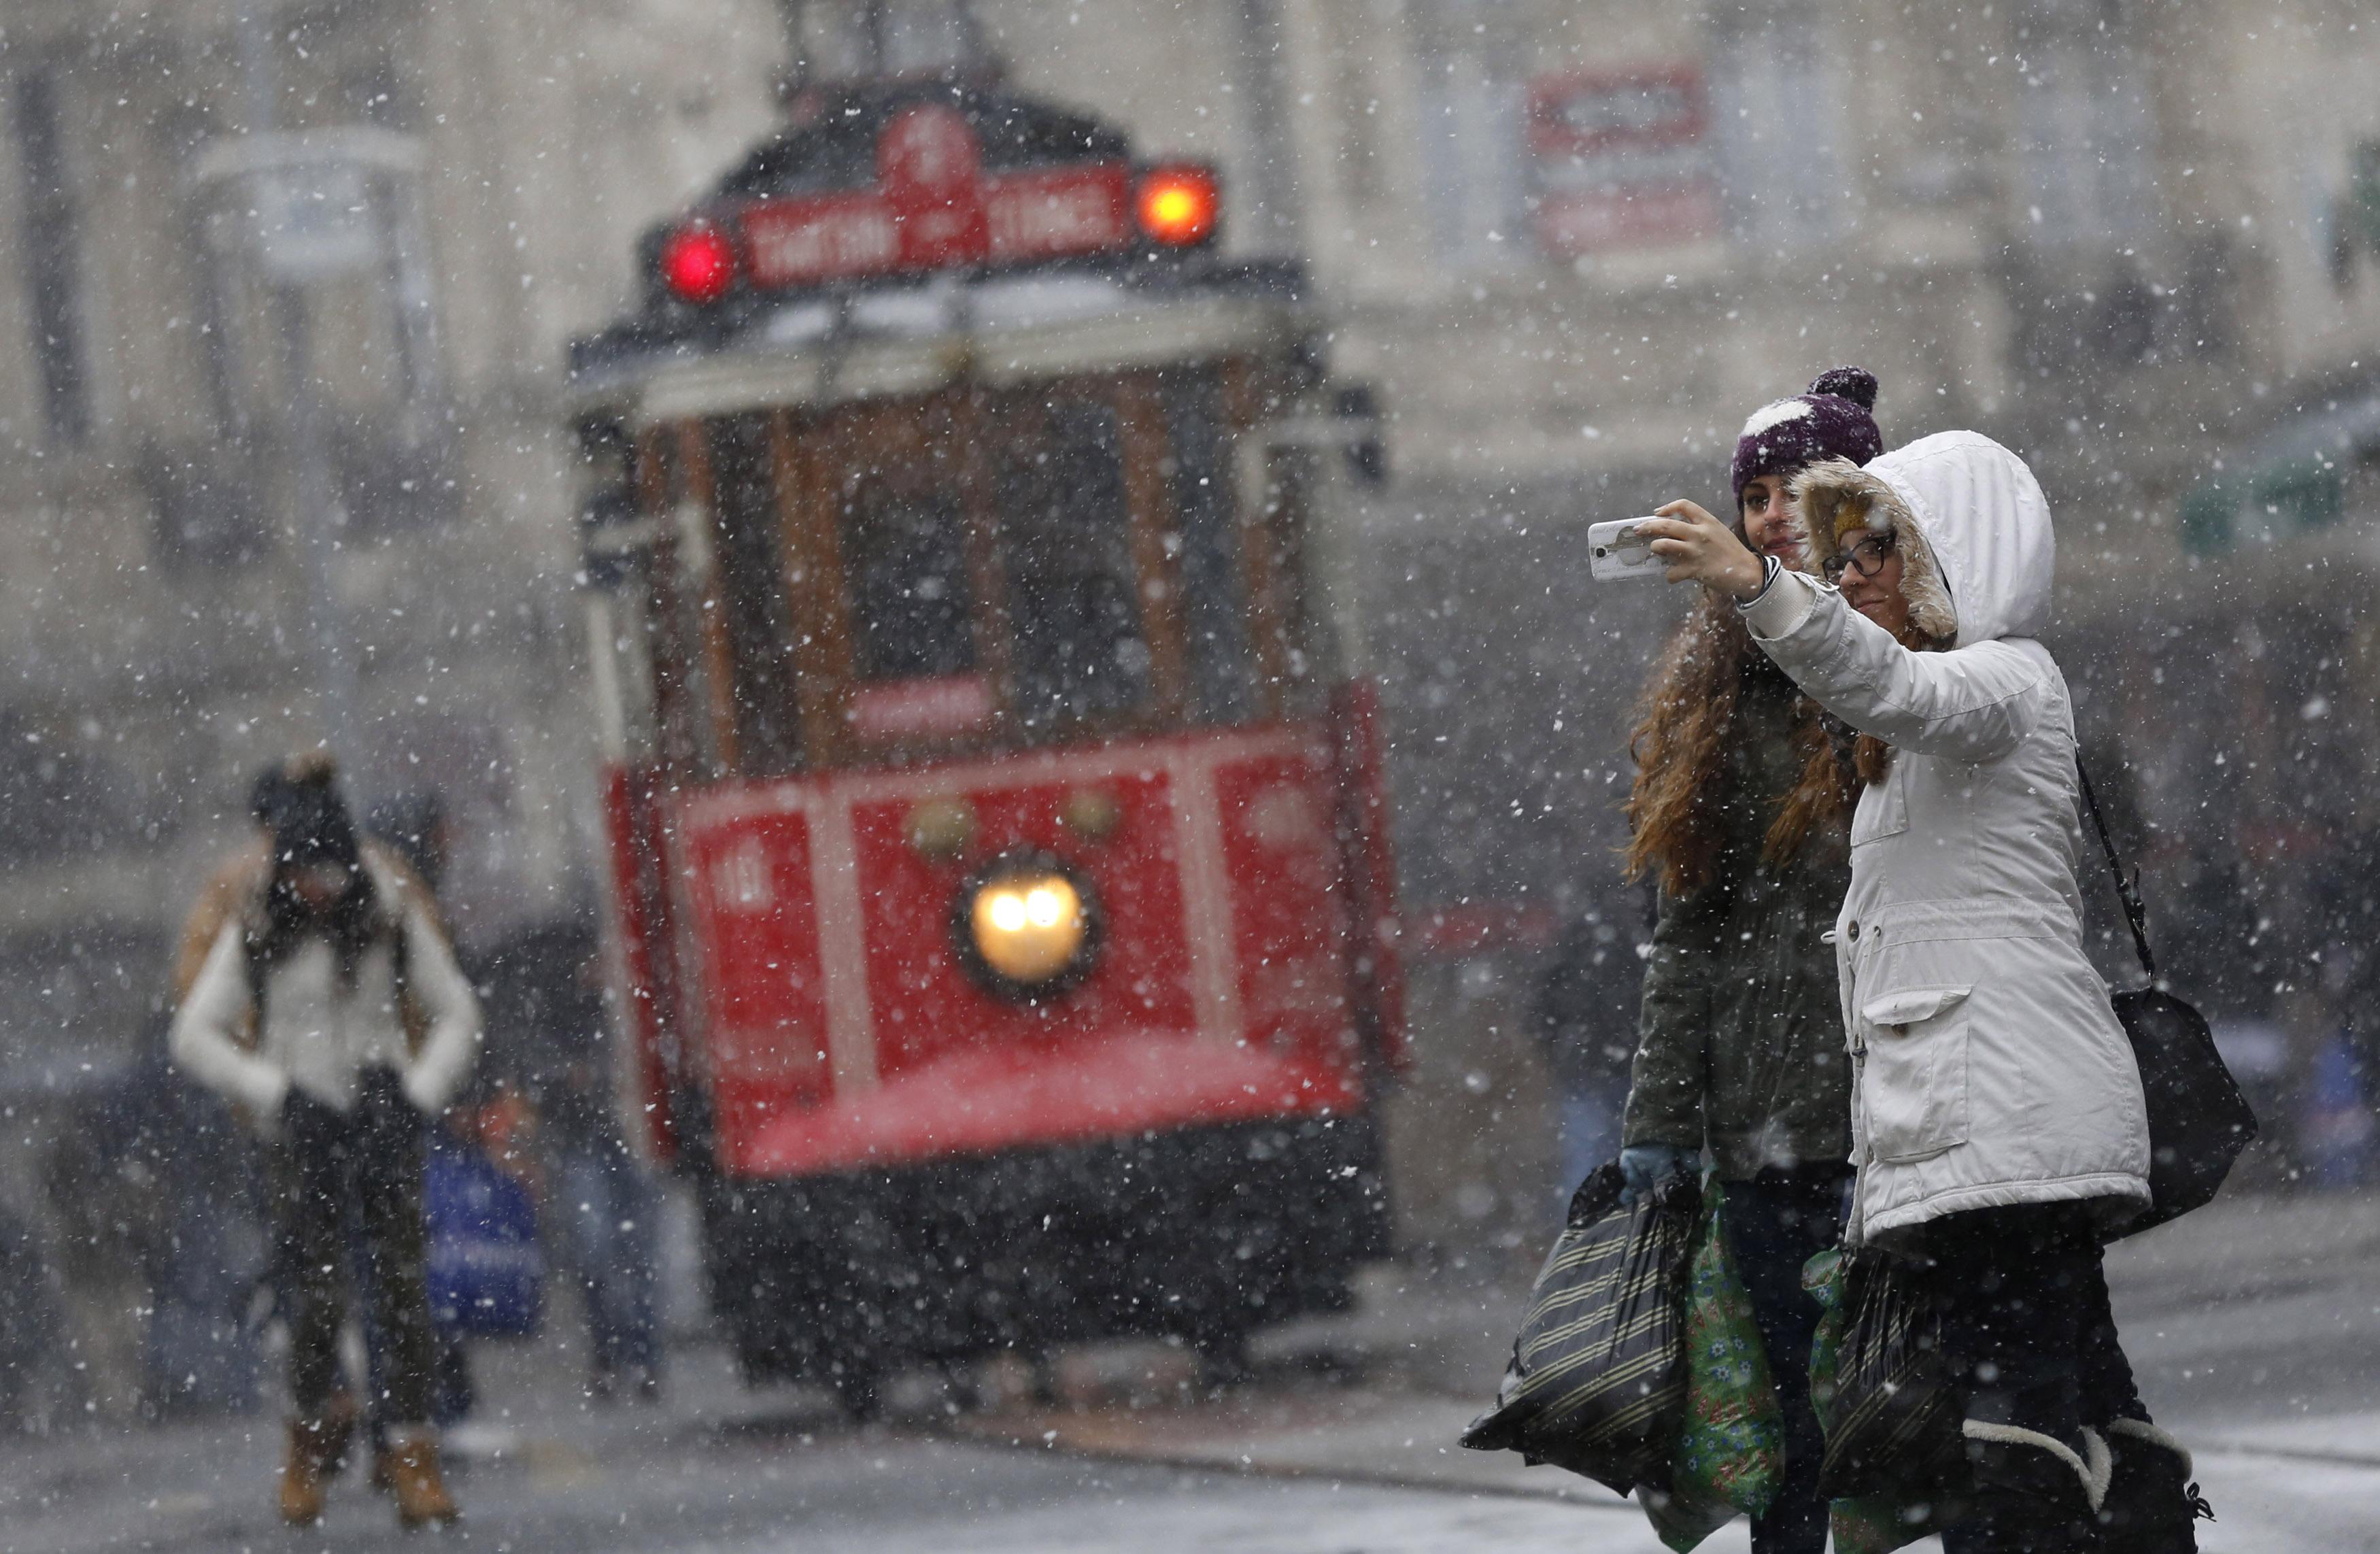 Pedestrians, with a vintage tram in the background, take a "selfie" as snow falls at the main shopping street of Istiklal in central Istanbul, in this January 6, 2015 file photo. REUTERS/Murad Sezer/Files (TURKEY - Tags: ENVIRONMENT SOCIETY) ATTENTION EDITORS - THIS PICTURE IS PART OF THE PACKAGE "THE SELFIE PHENOMENON". TO FIND ALL 19 IMAGES SEARCH 'SELFIE'